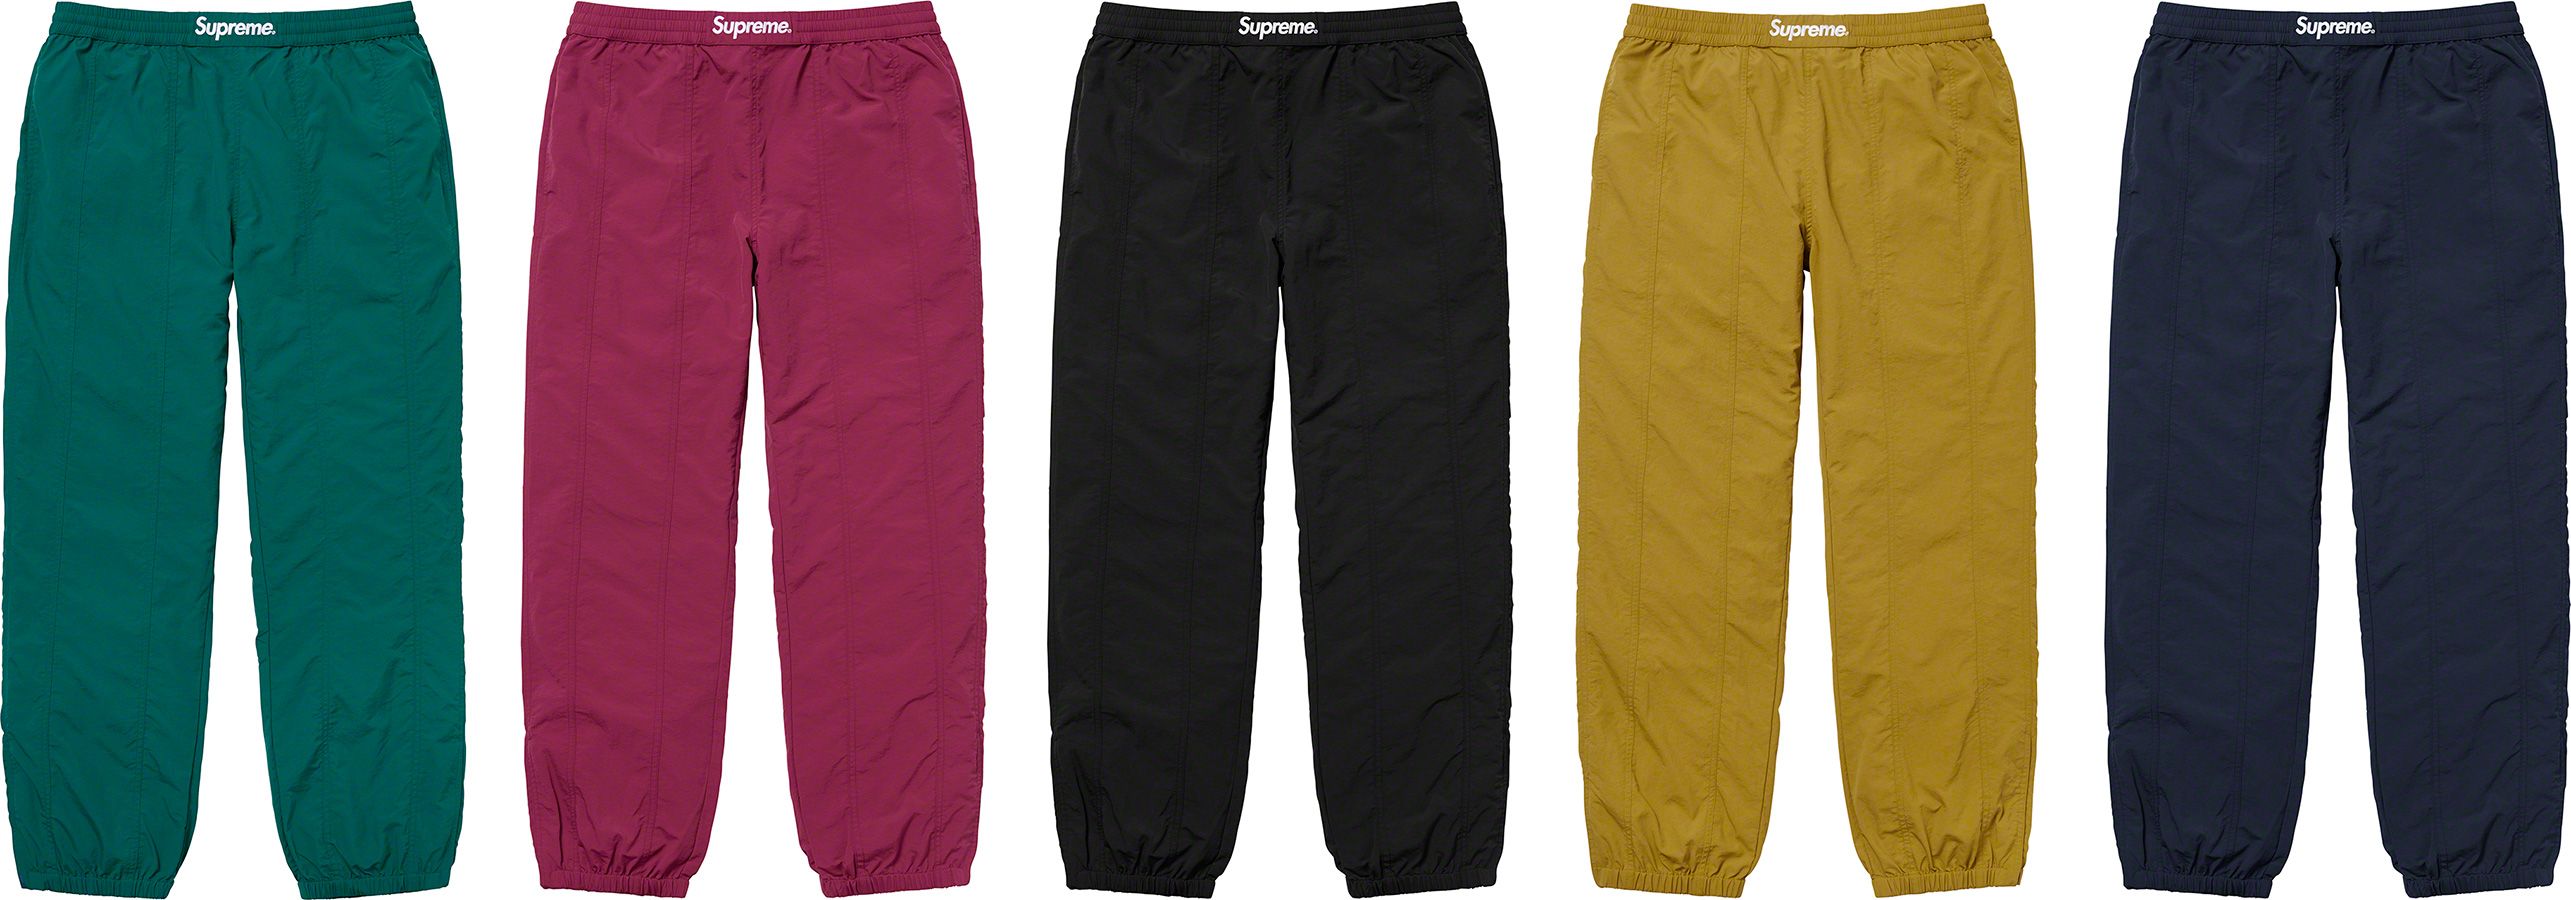 Paneled Warm Up Pant - Fall/Winter 2019 Preview – Supreme